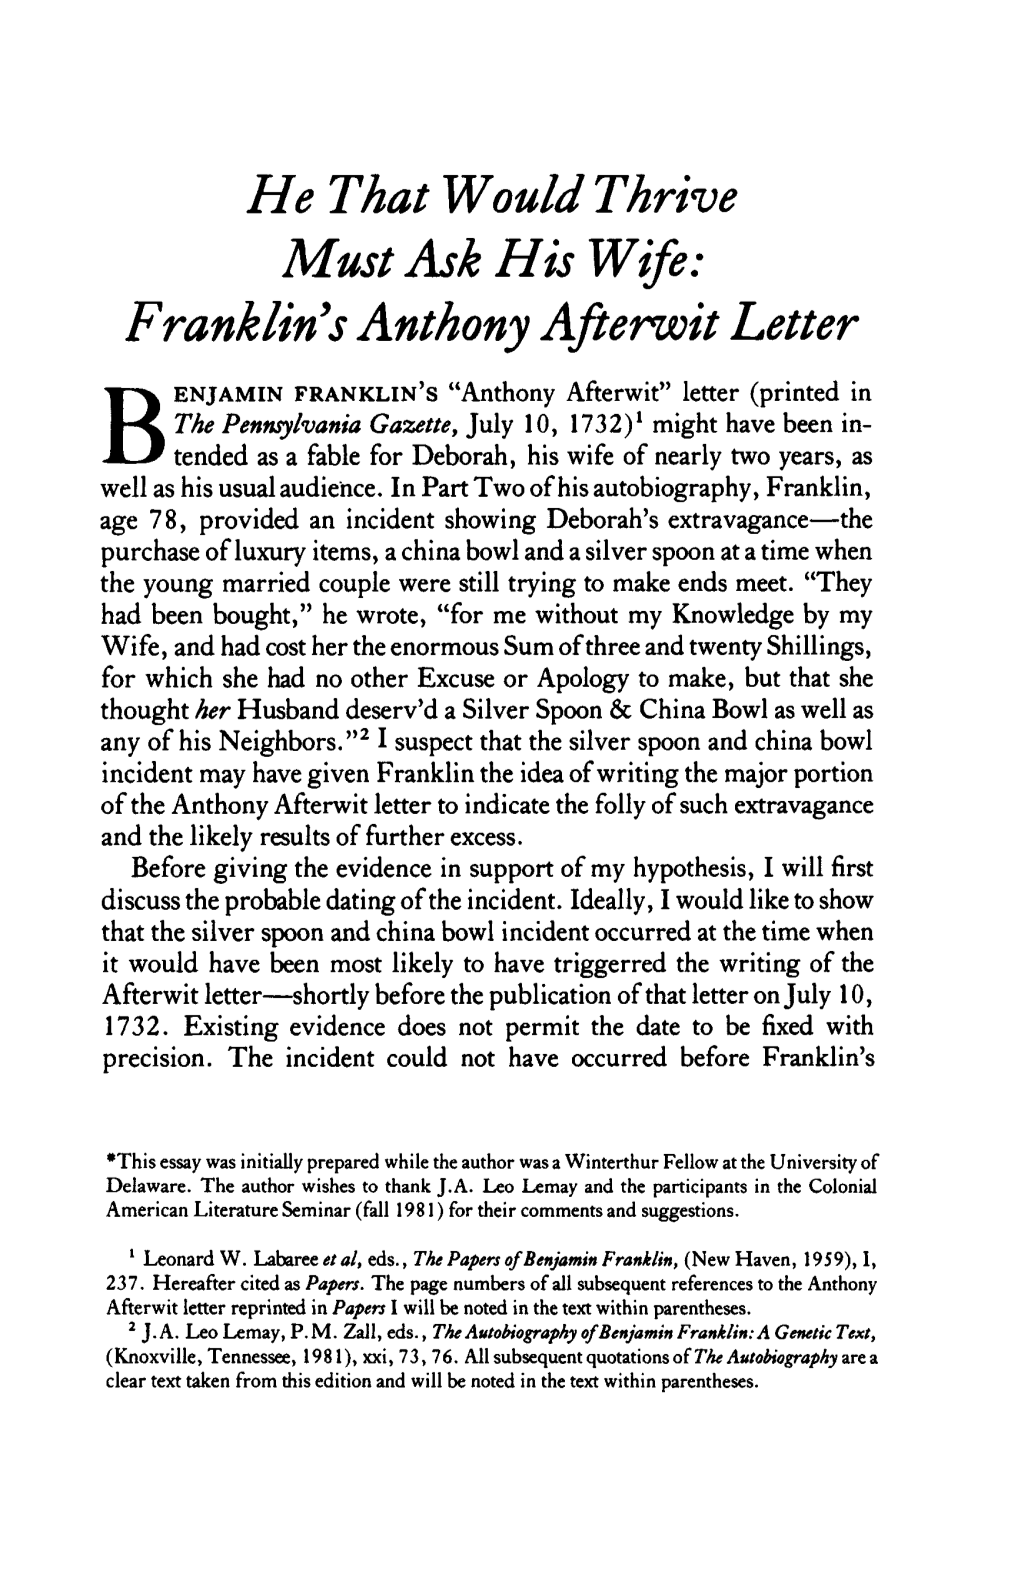 Franklin's Anthony Afterwit Letter